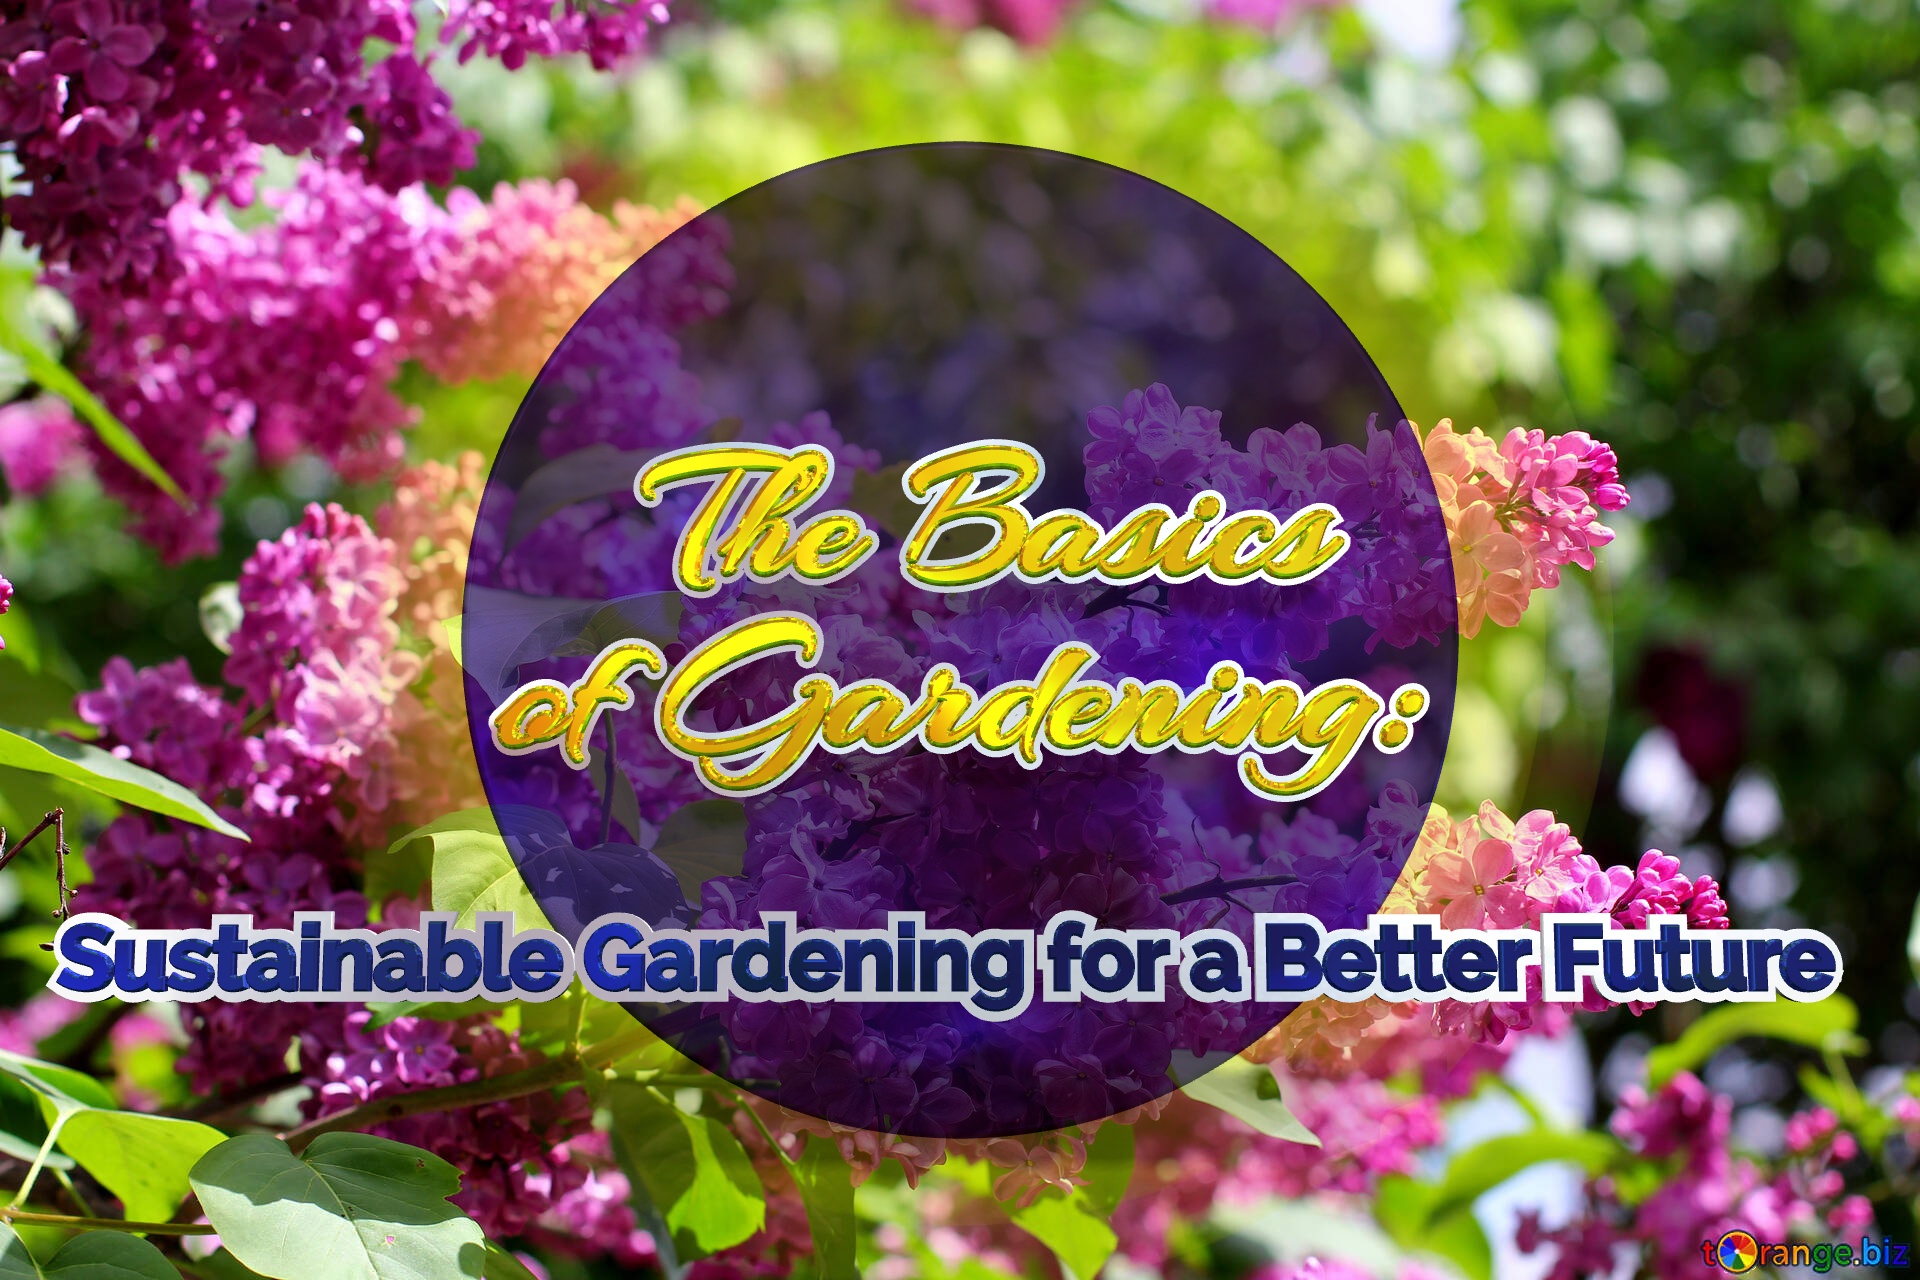    The Basics  of Gardening:   Sustainable Gardening for a Better Future  Bright picture with lilac flowers №37487